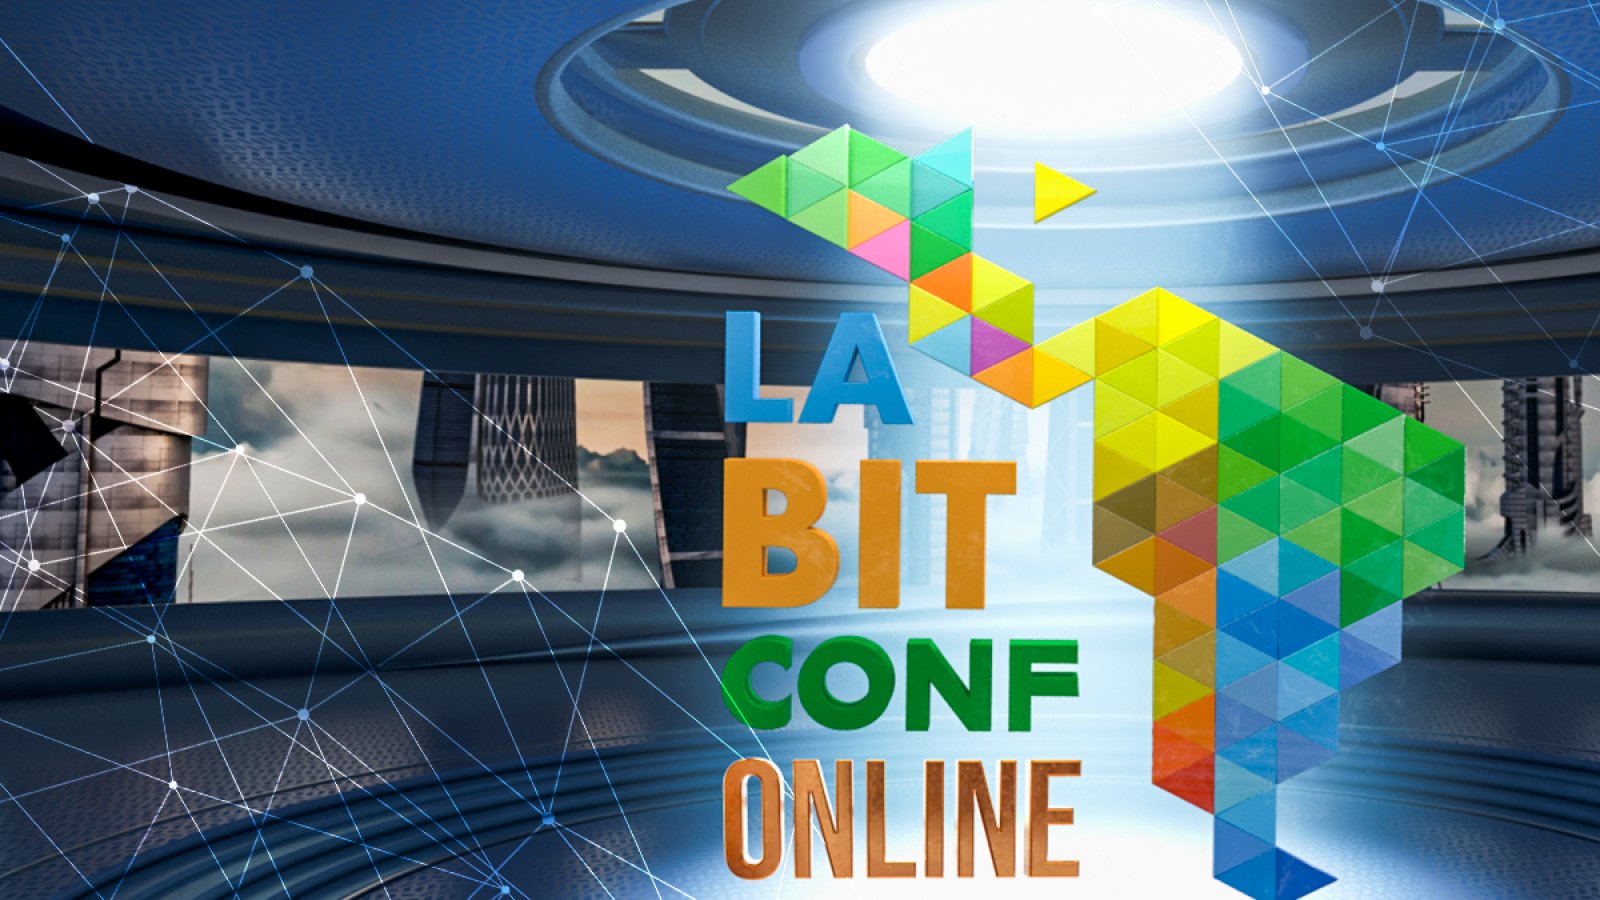 Latin American Bitcoin Conference Crosses Frontiers Through Digital Experience, Joined By Industry Heavyweights Andreas M. Antonopoulos, Alena Vranova, Alex Gladstein, and Bruce Fenton